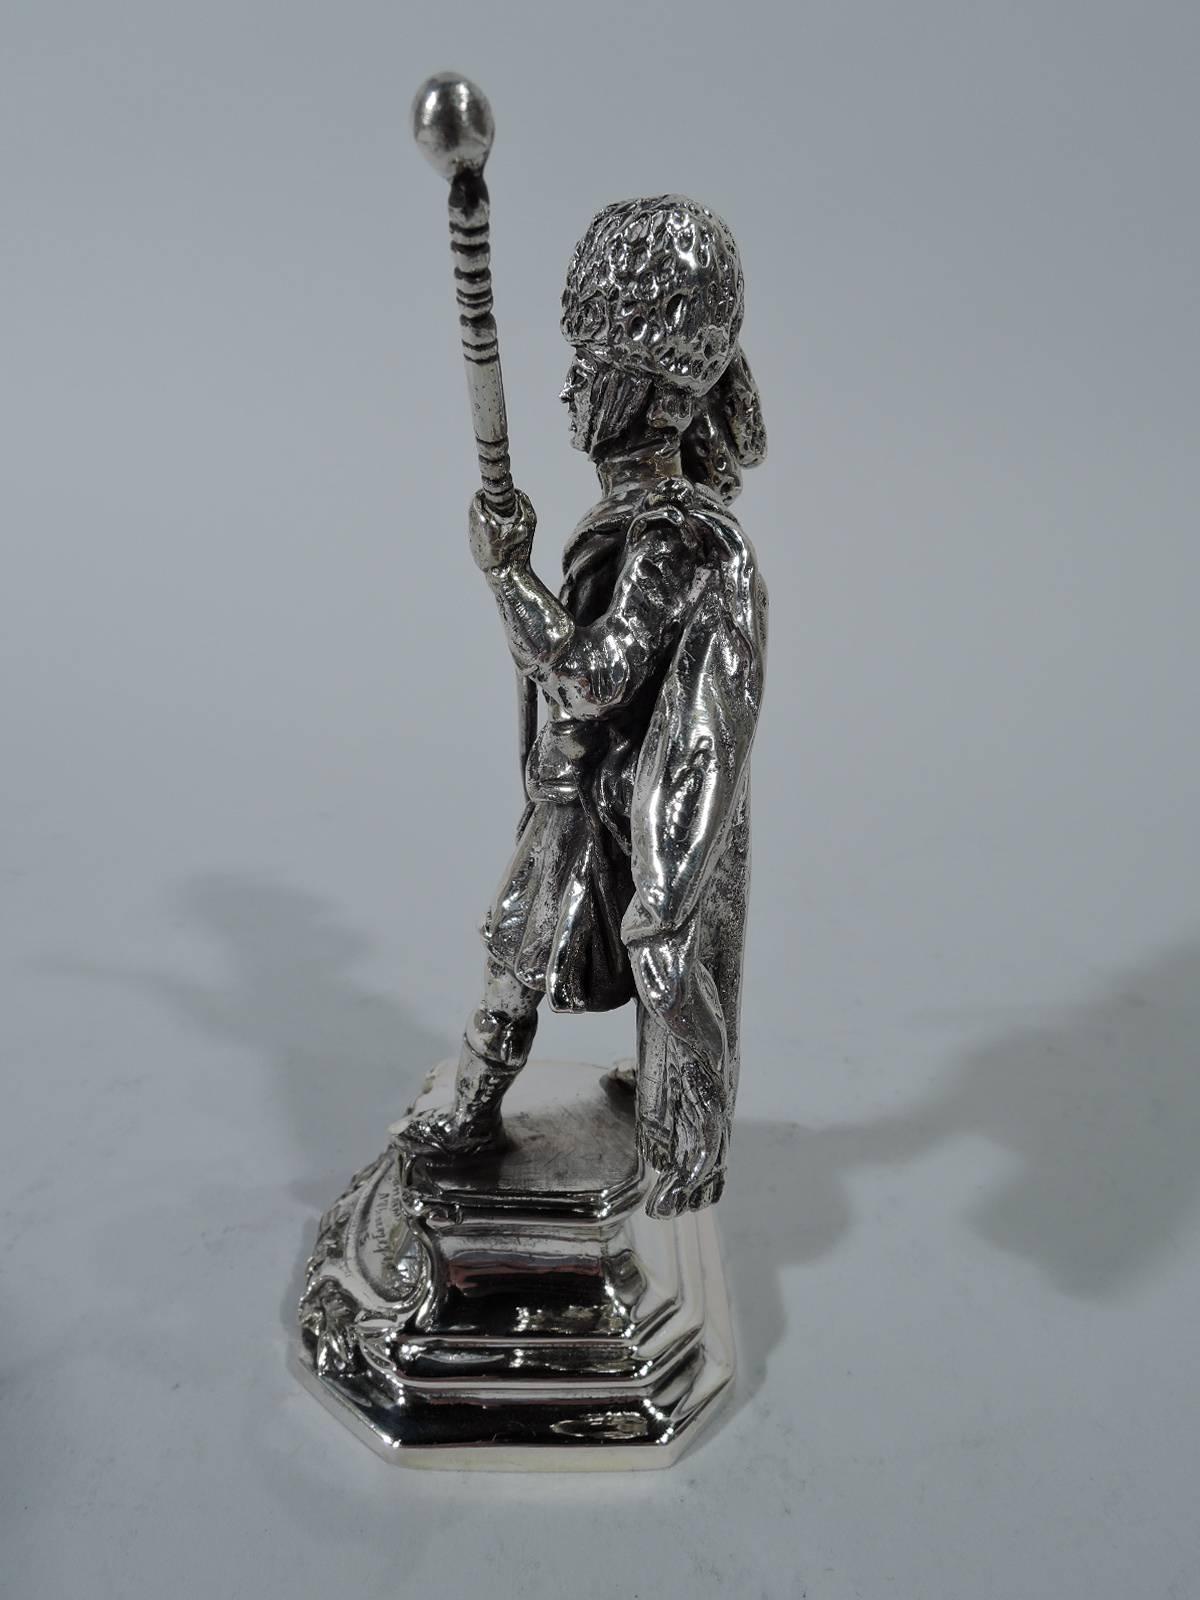 Cast military figurine of Scottish Highlander in full stride. He wears kilt, cape, and bearskin hat, and holds a staff. Plinth mount with script inscription and 1745, the year of the Jacobite Rising lead by the Young Pretender. A great gift for